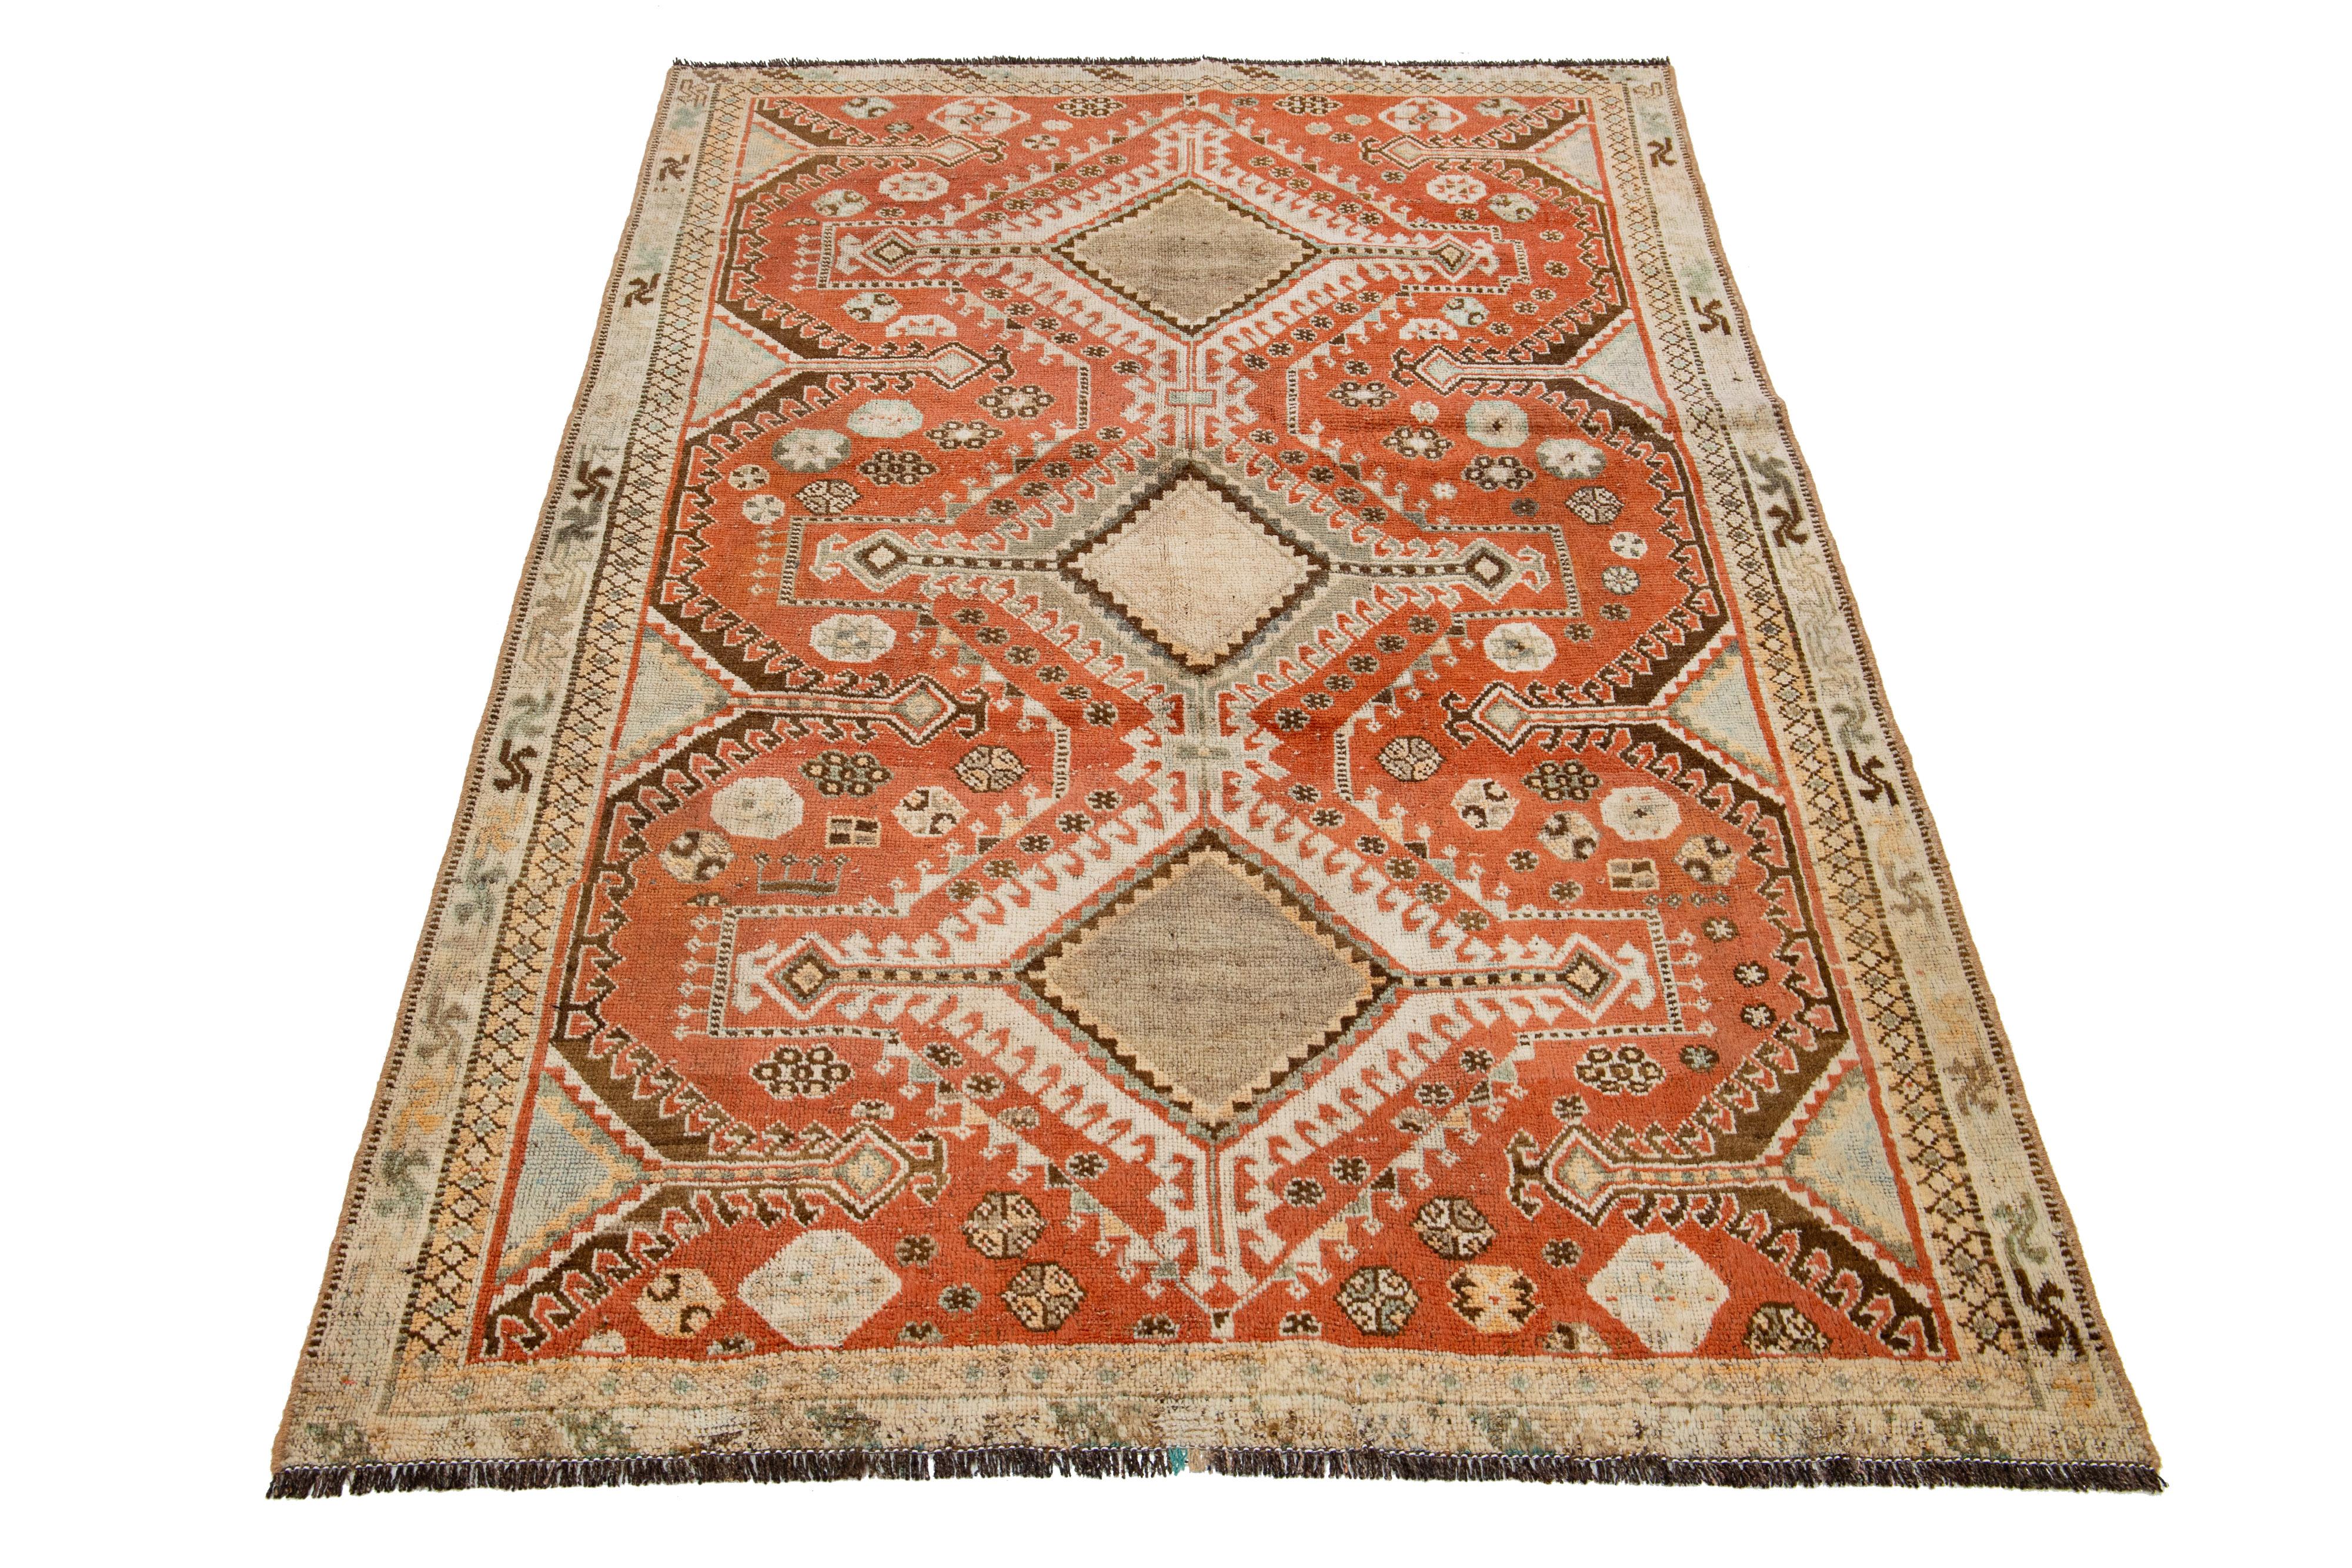 This Persian Shiraz wool rug displays a tribal design featuring stunning brown and beige accents on a rust background.

This rug measures 4'5